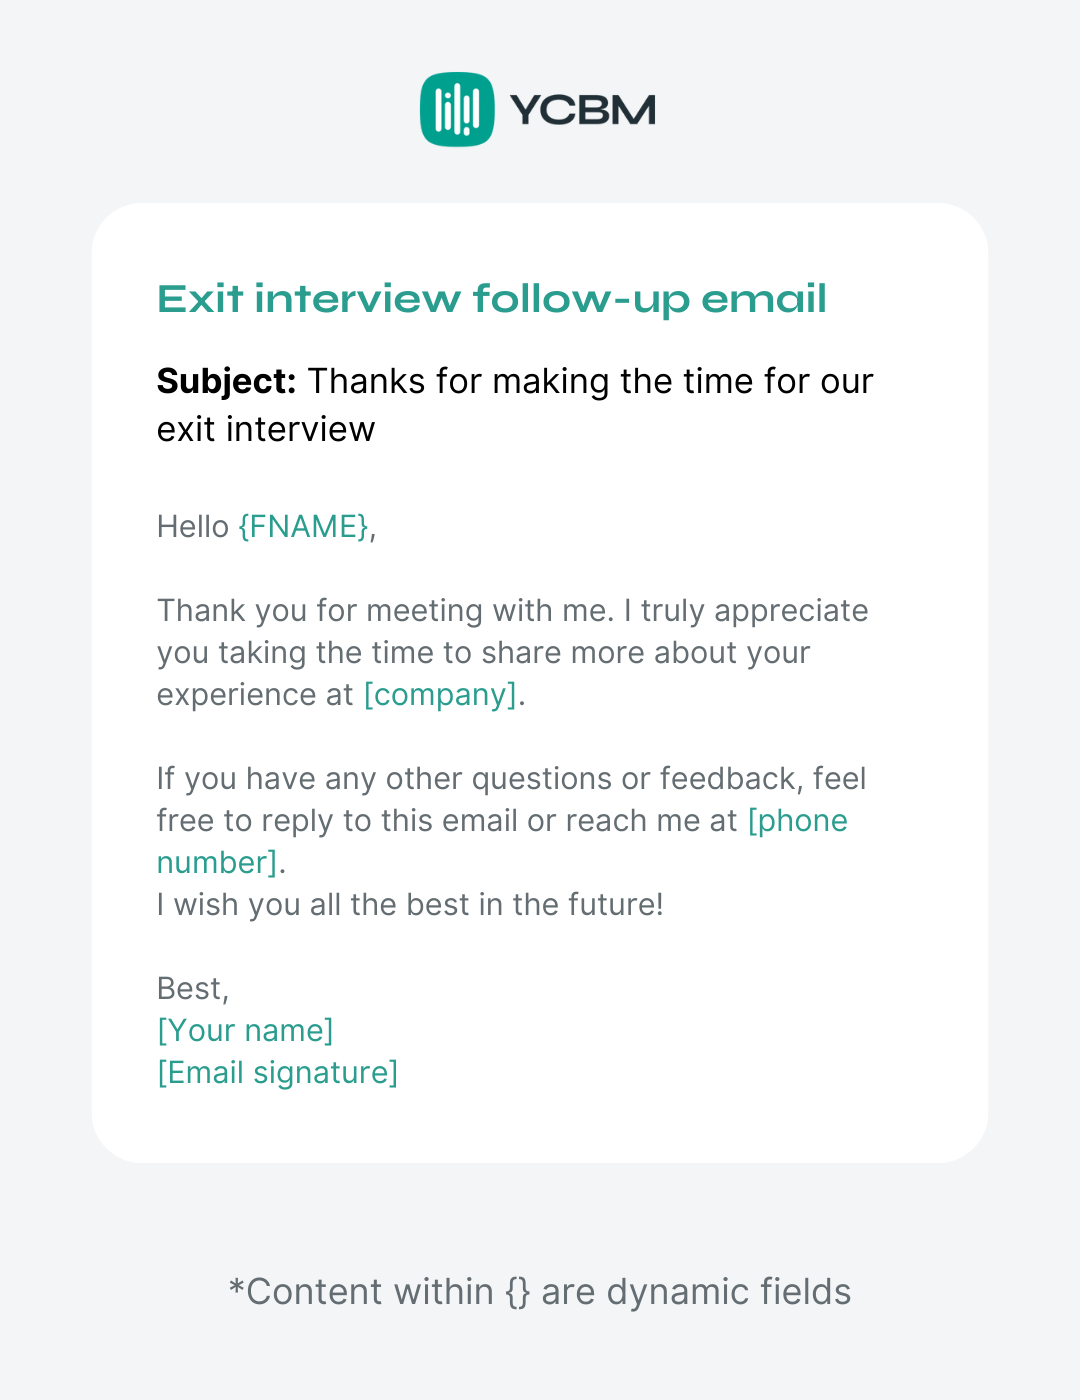 exit interview follow-up email